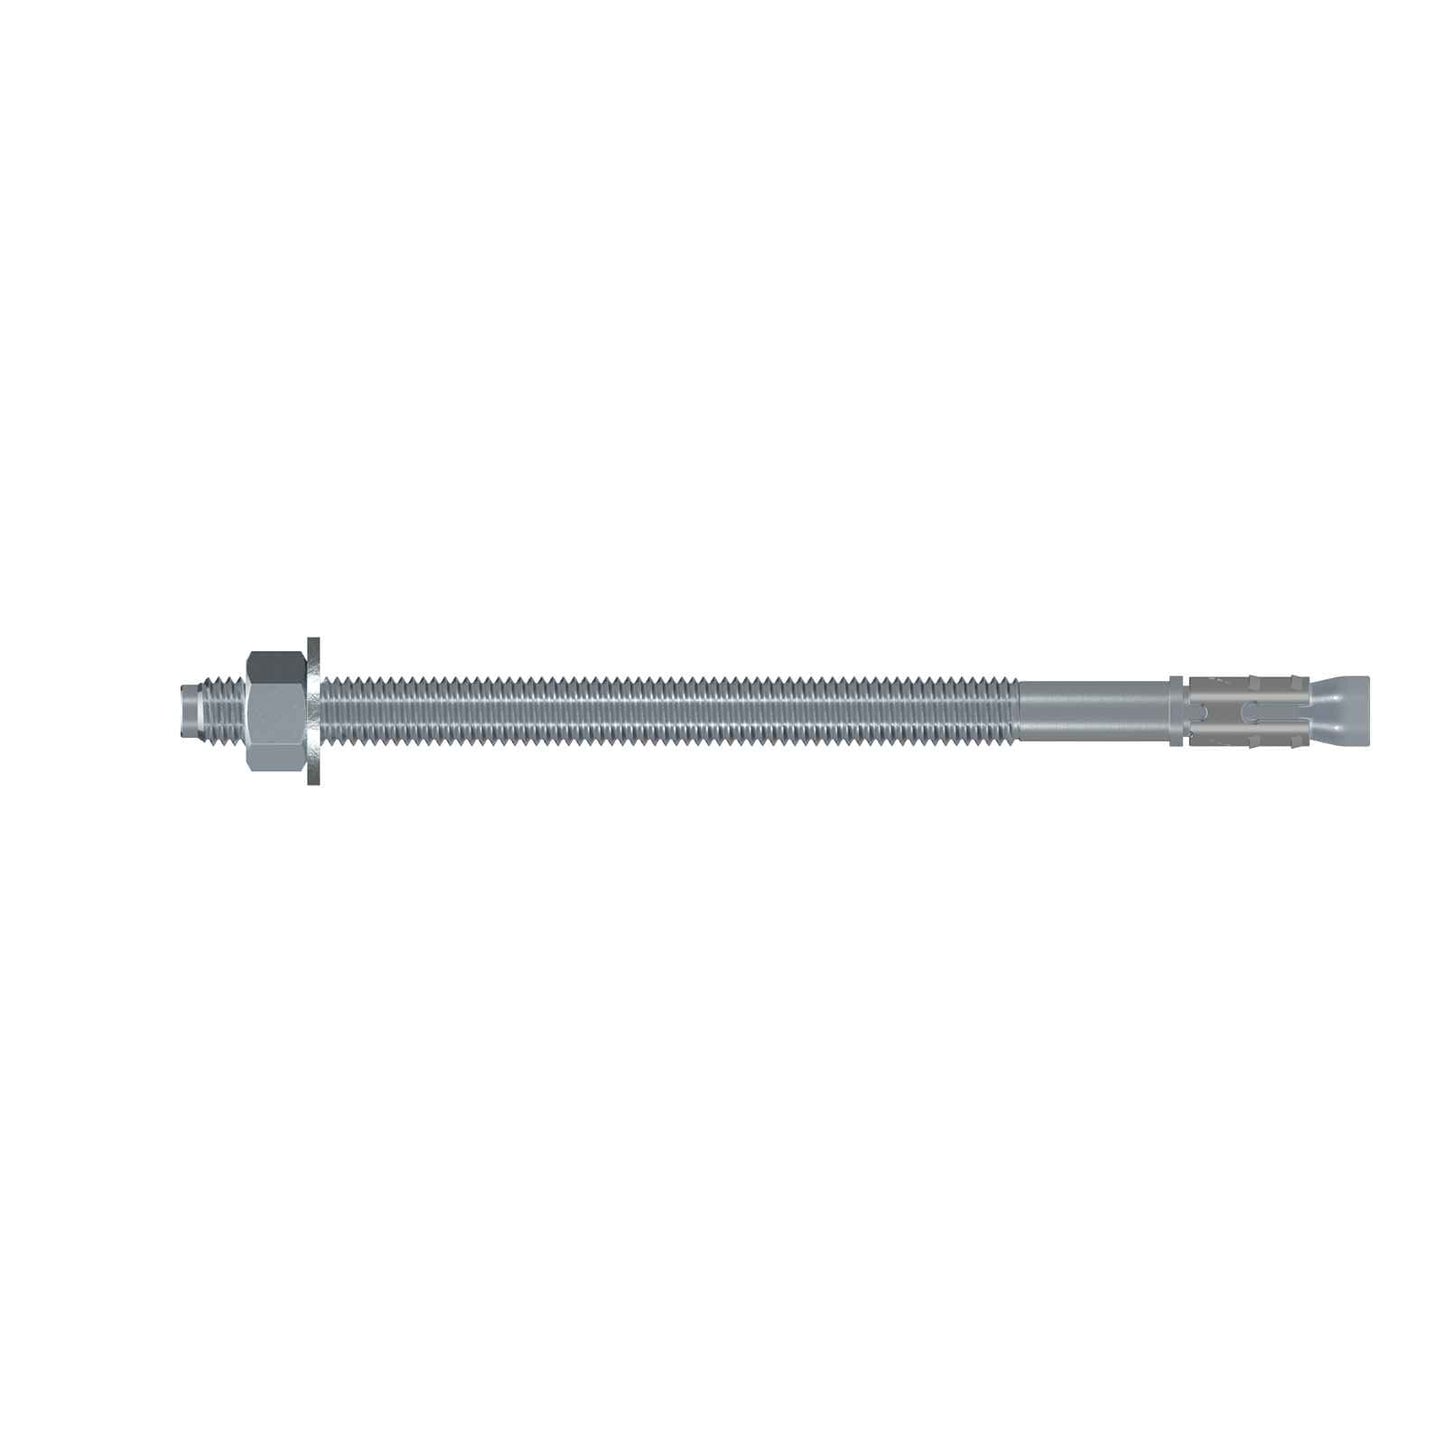 12 inch x 812 inch StrongTie Strong Bolt 2 Wedge Anchor Zinc Plated Pkg 25